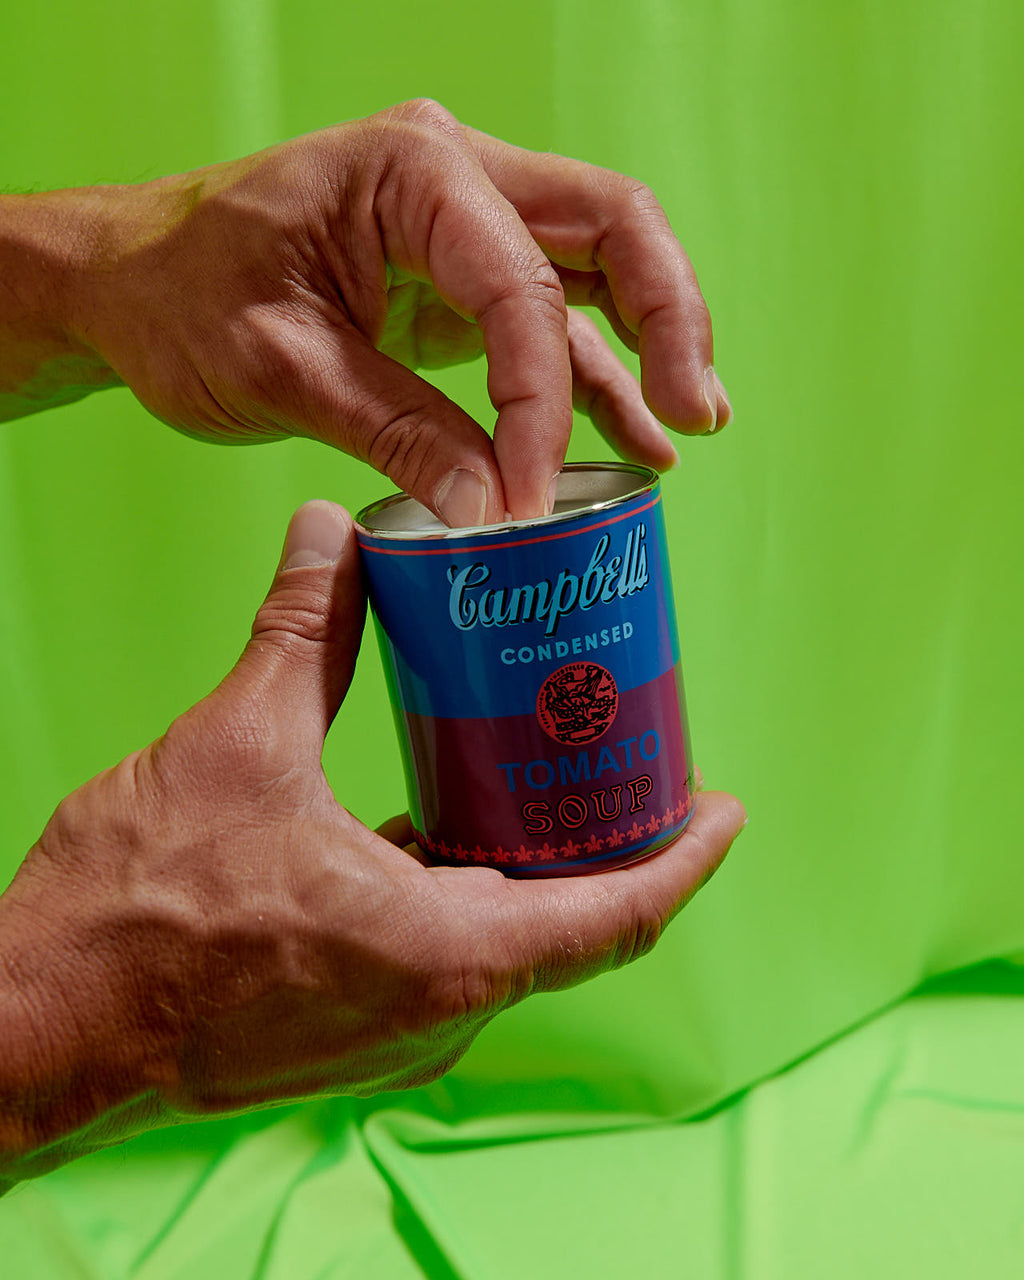 Andy Warhol Blue/Purple Campbell Candle